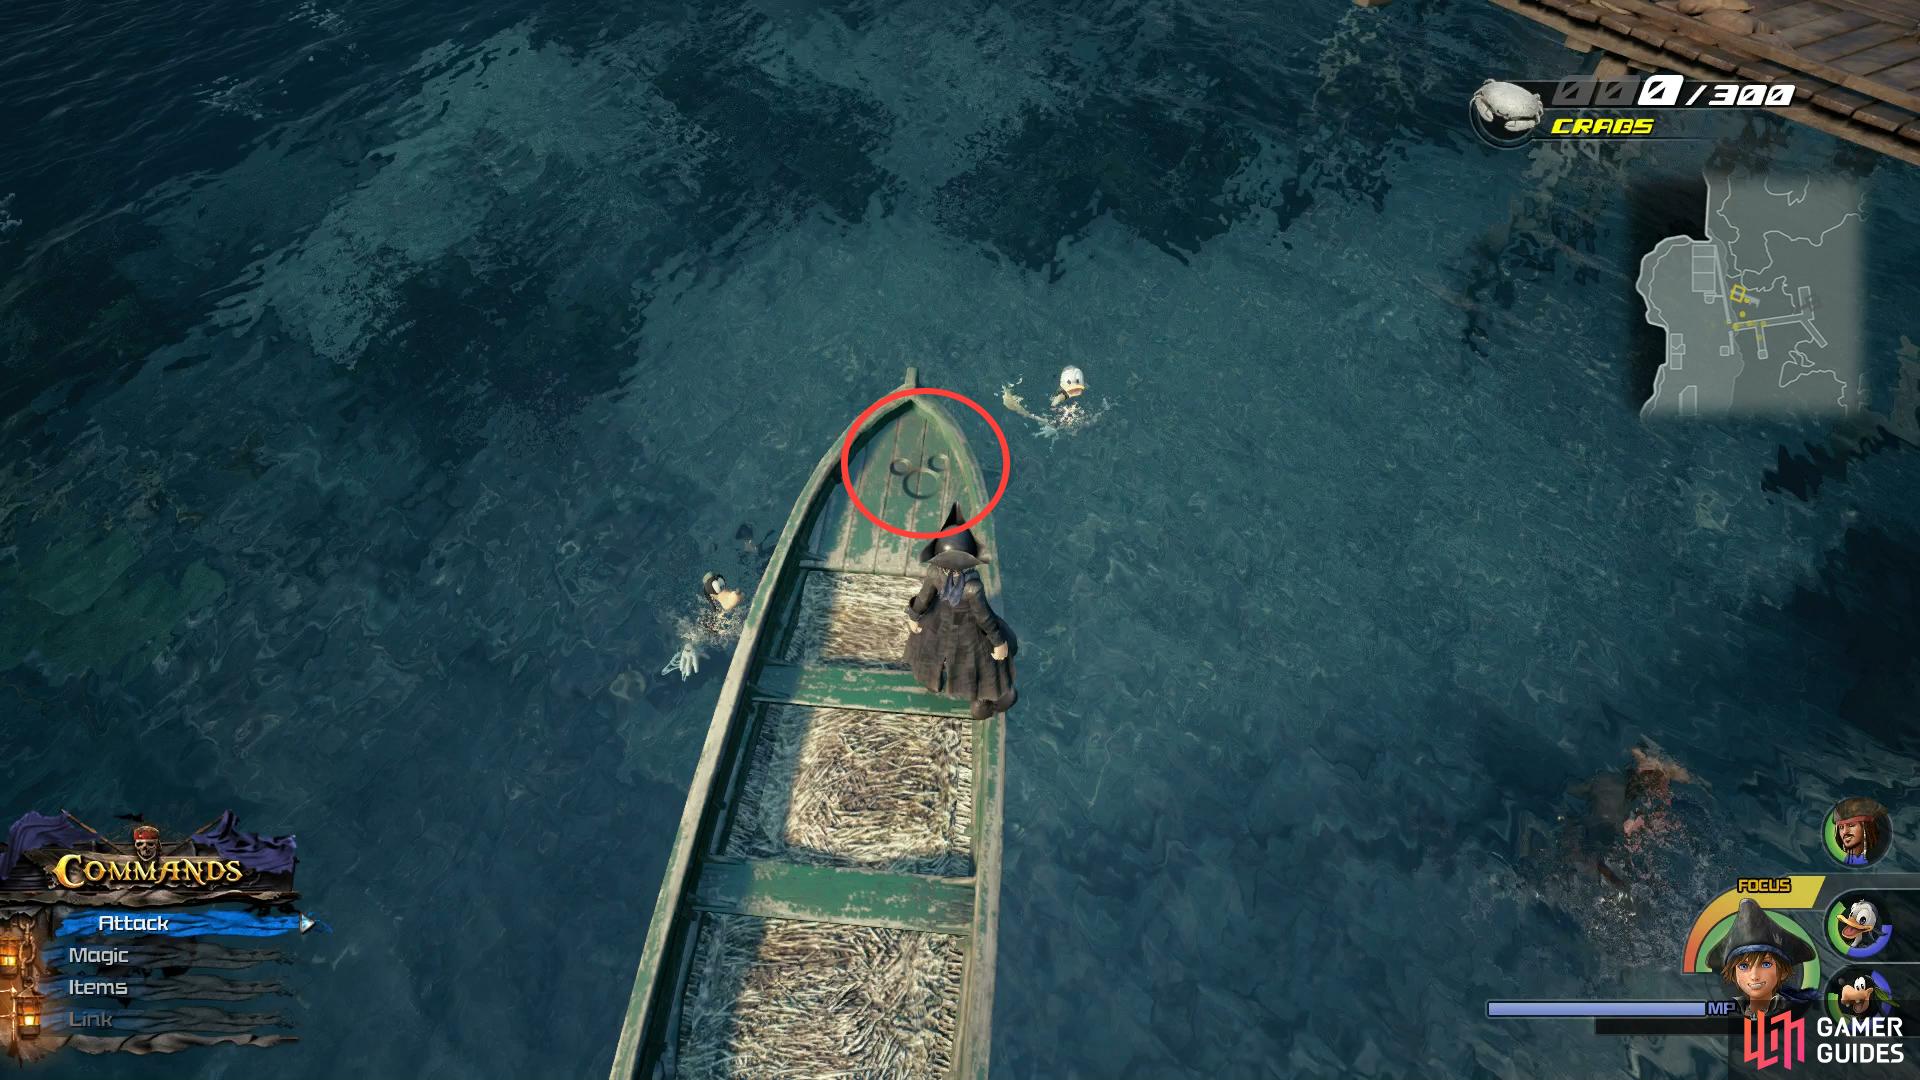 You'll find the first Lucky Emblem on the rowboat near the Leviathan